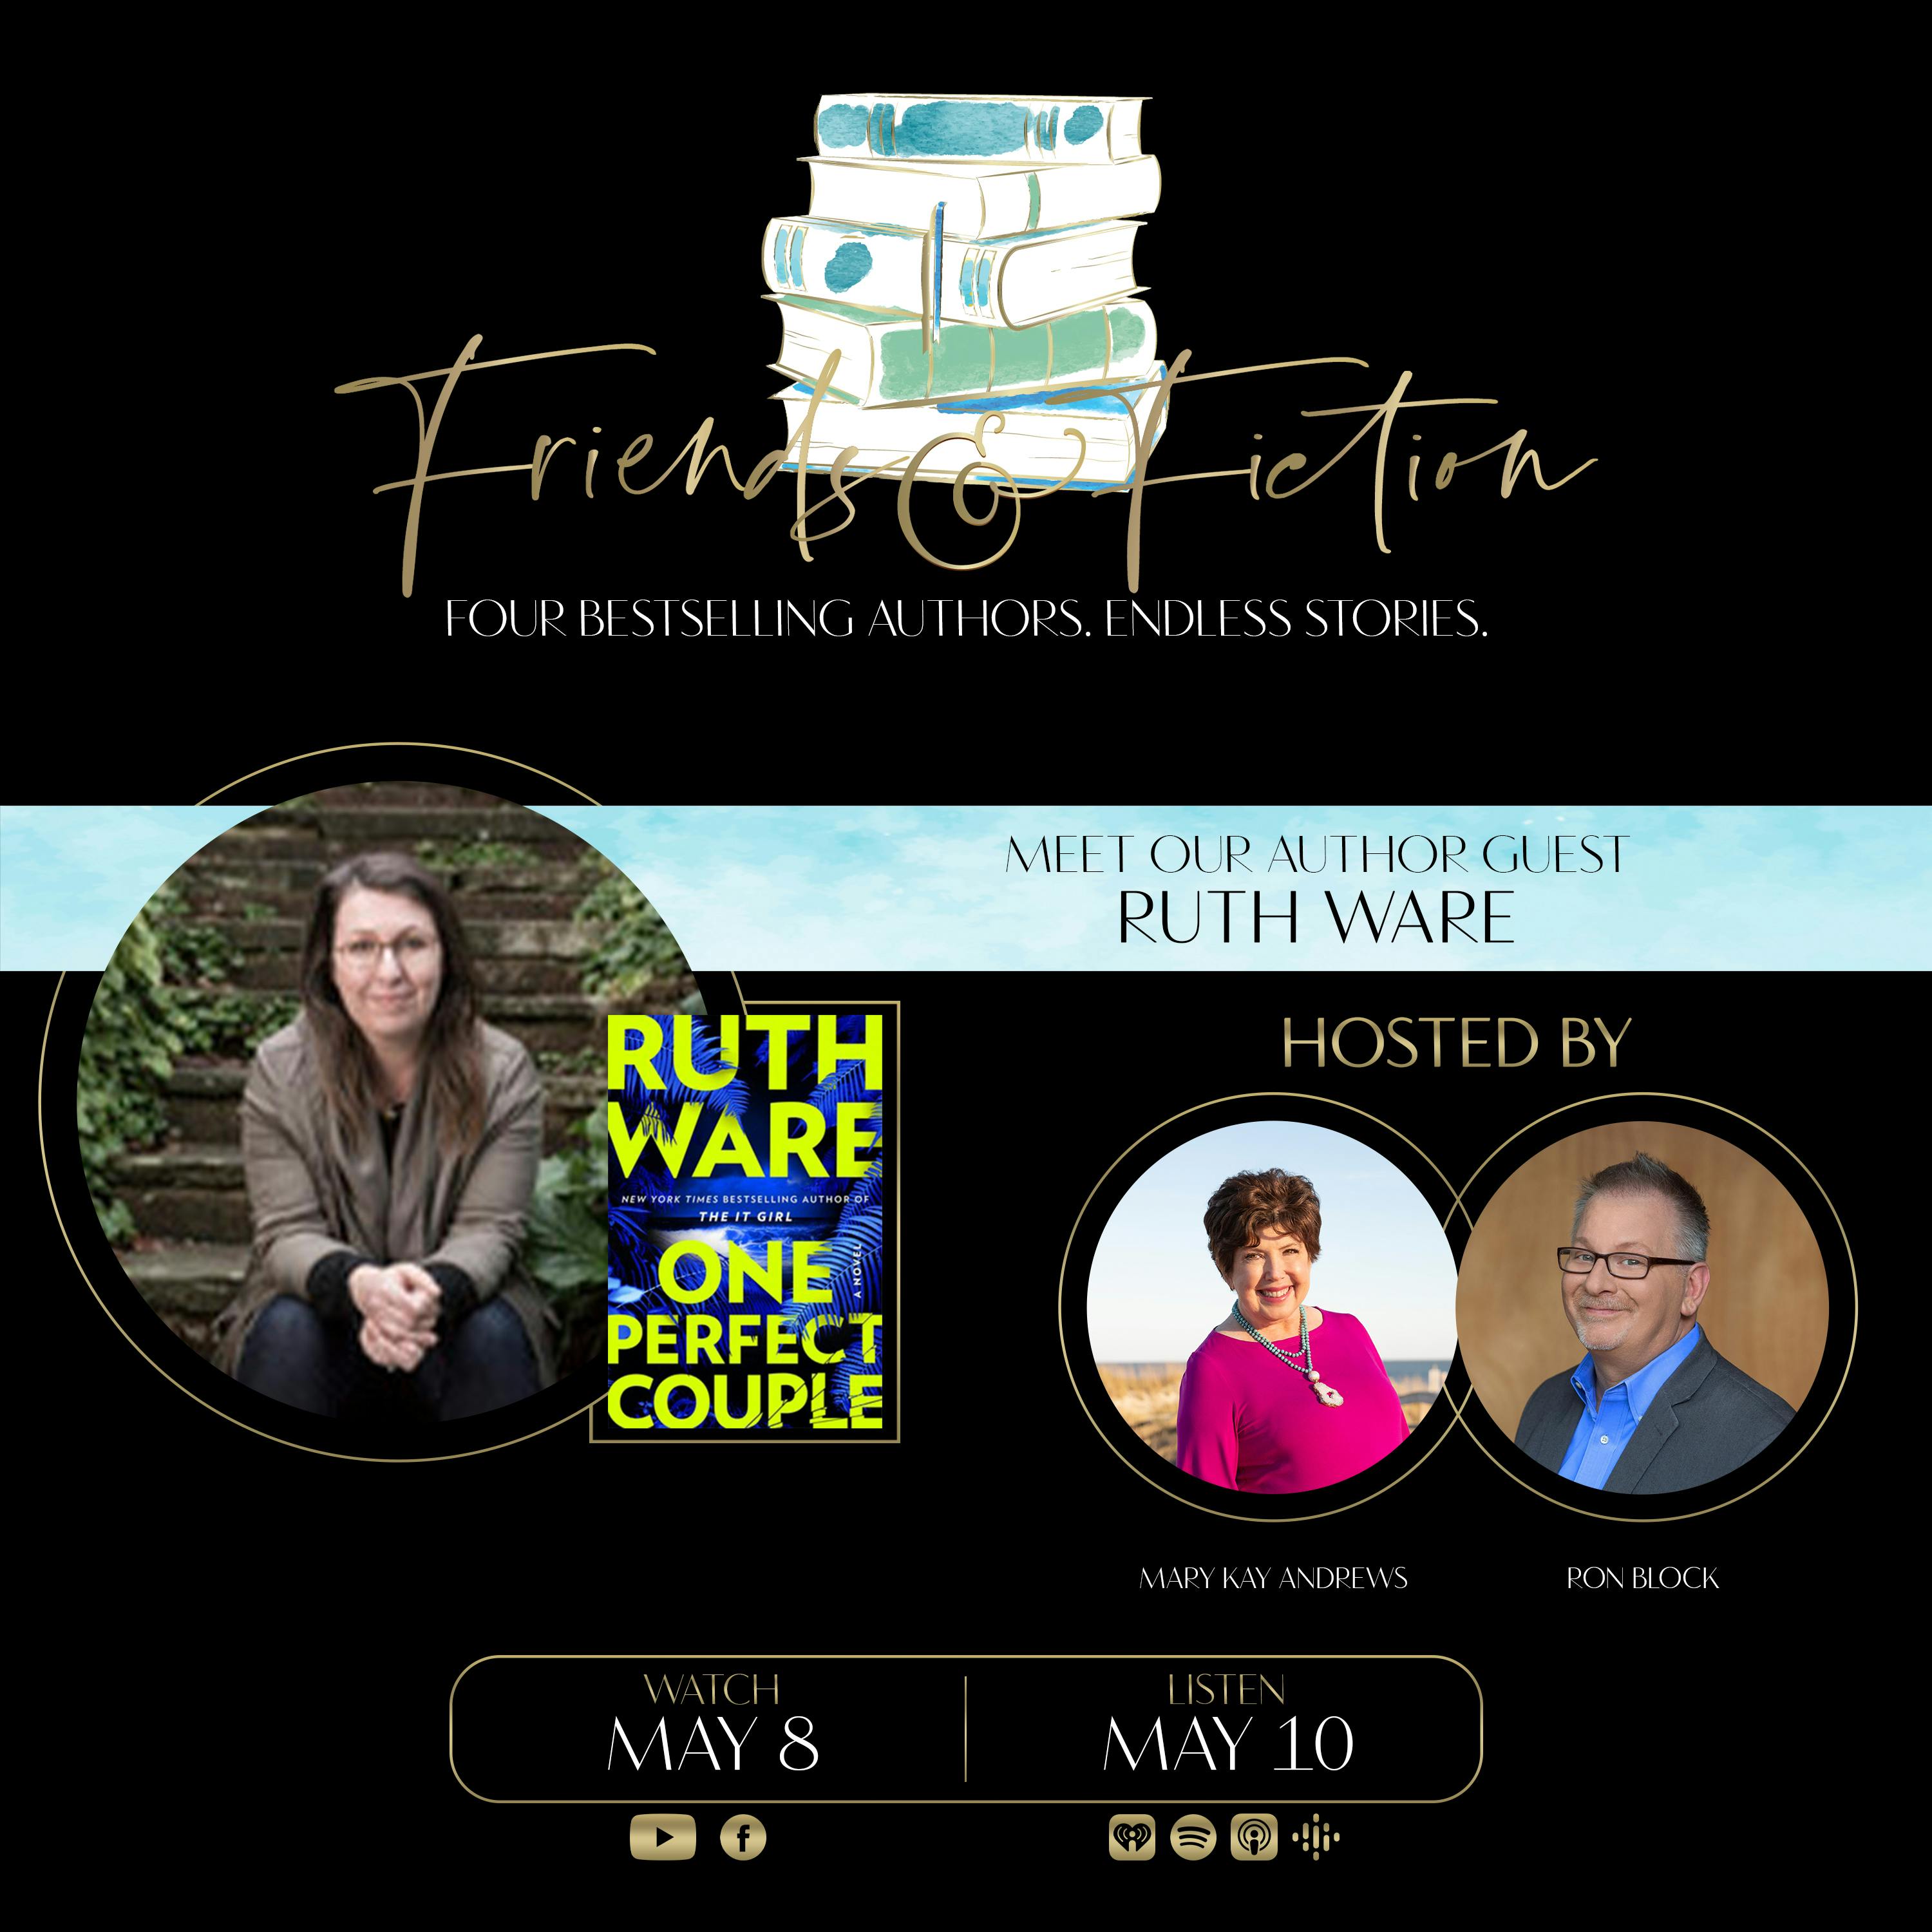 Friends & Fiction with Ruth Ware